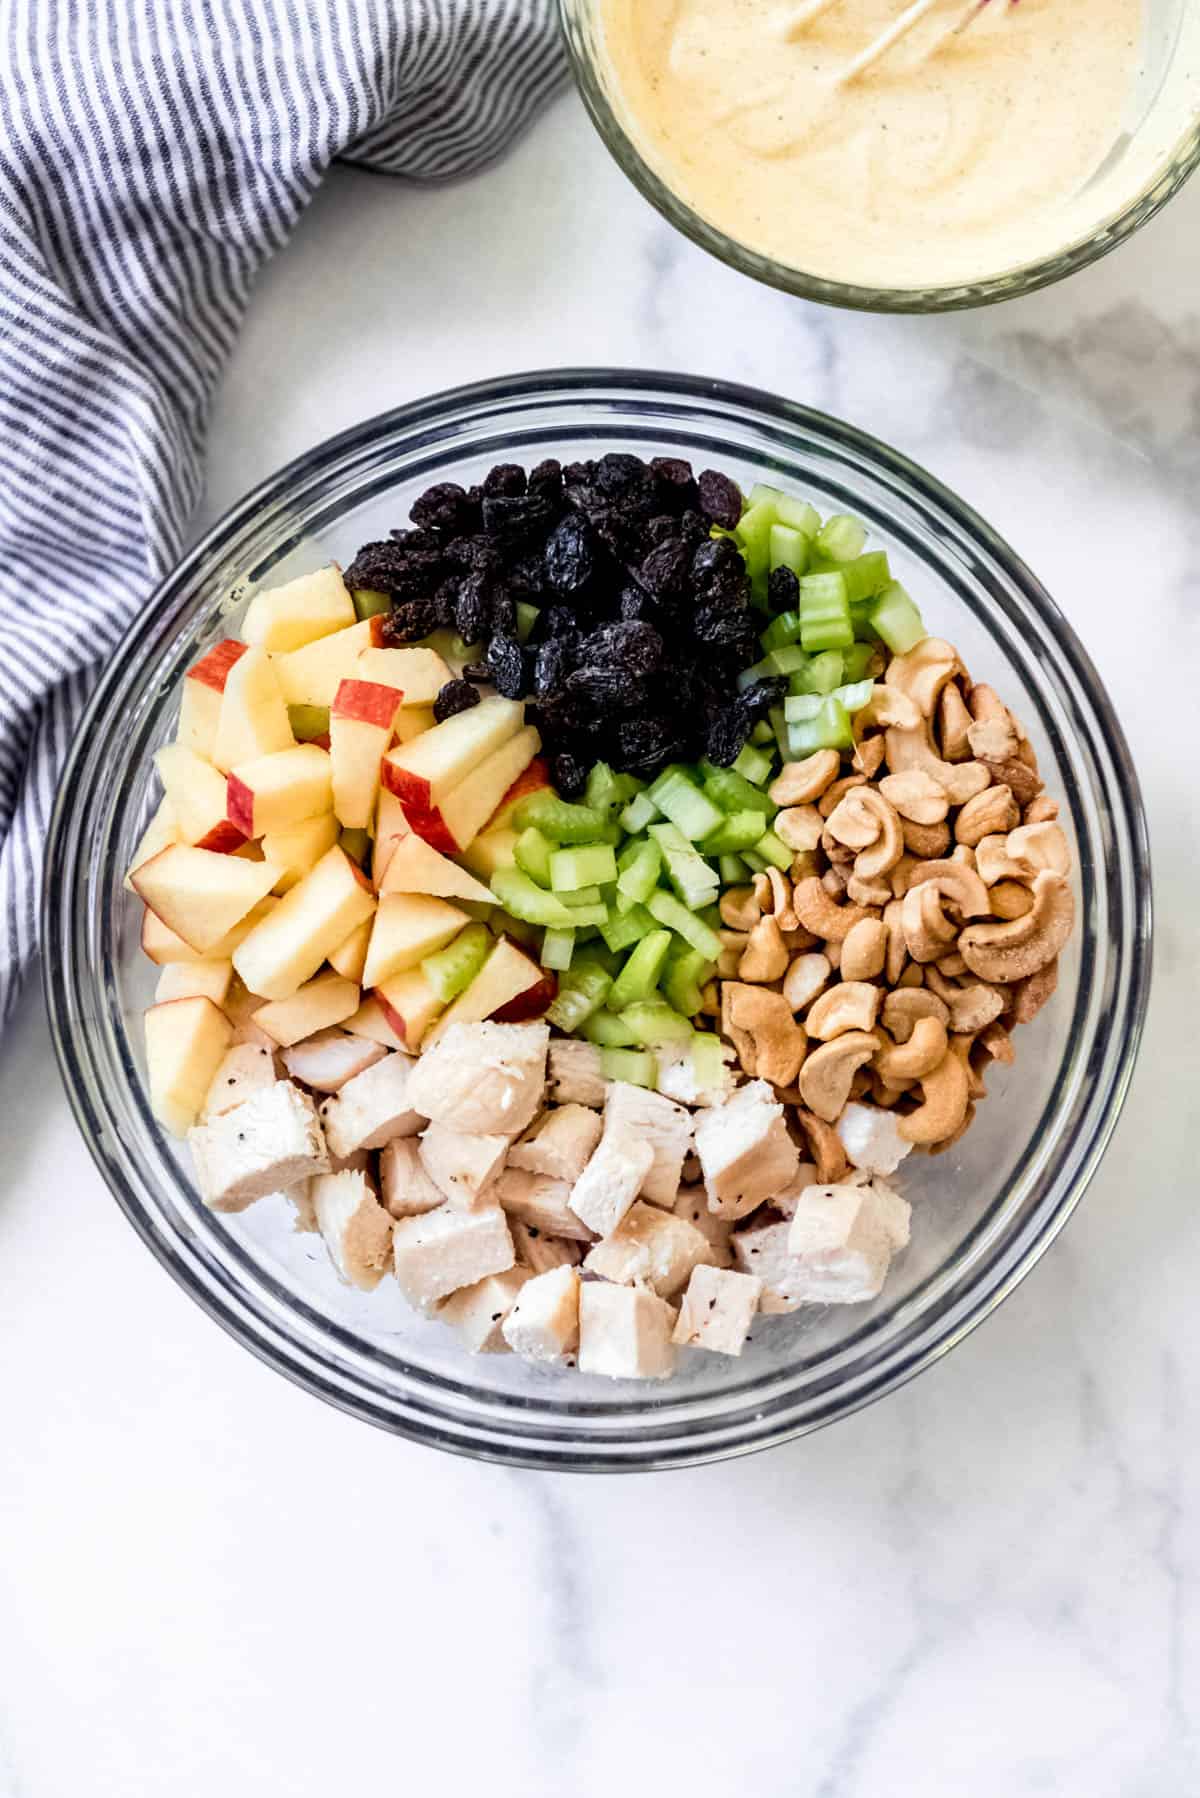 Chicken chunks, cashews, celery, raisins, and chopped apples in a glass bowl.